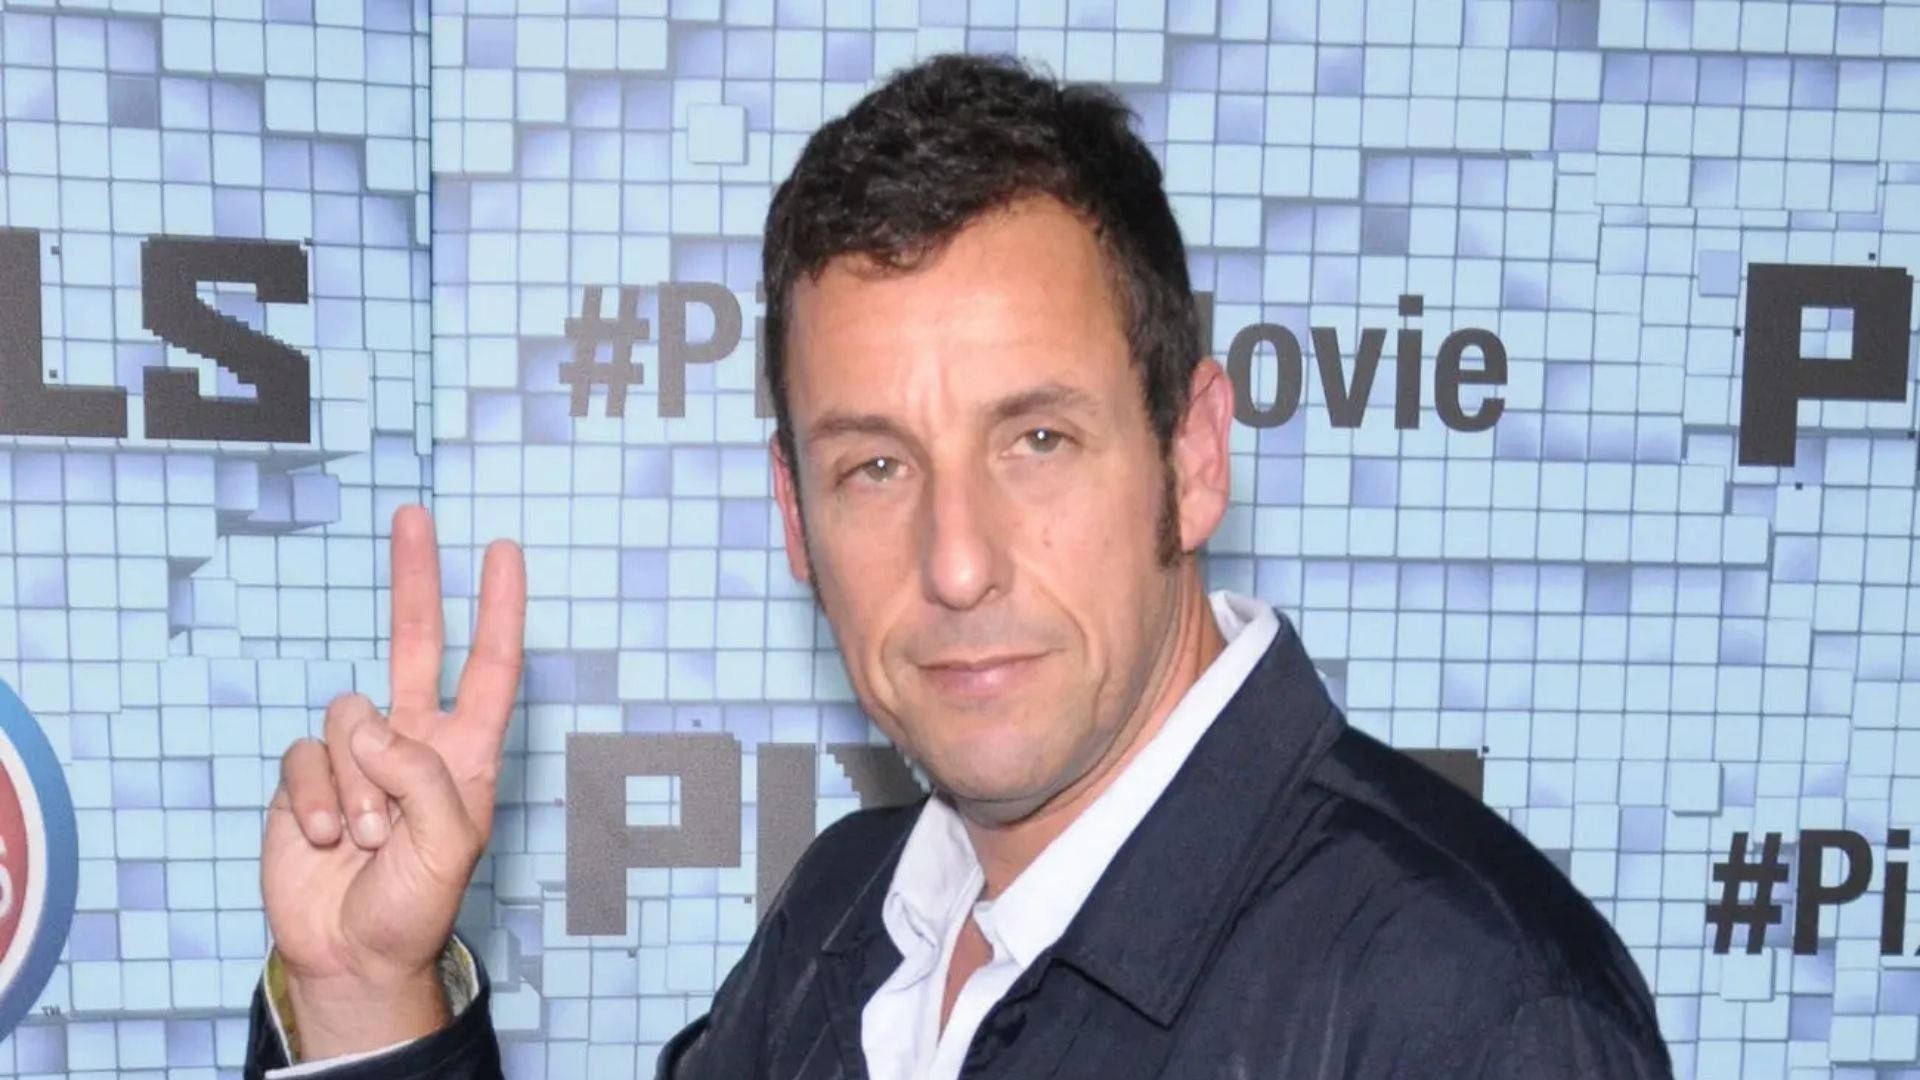 Caption: Adam Sandler flashing a peace sign with a charming smile. Wallpaper